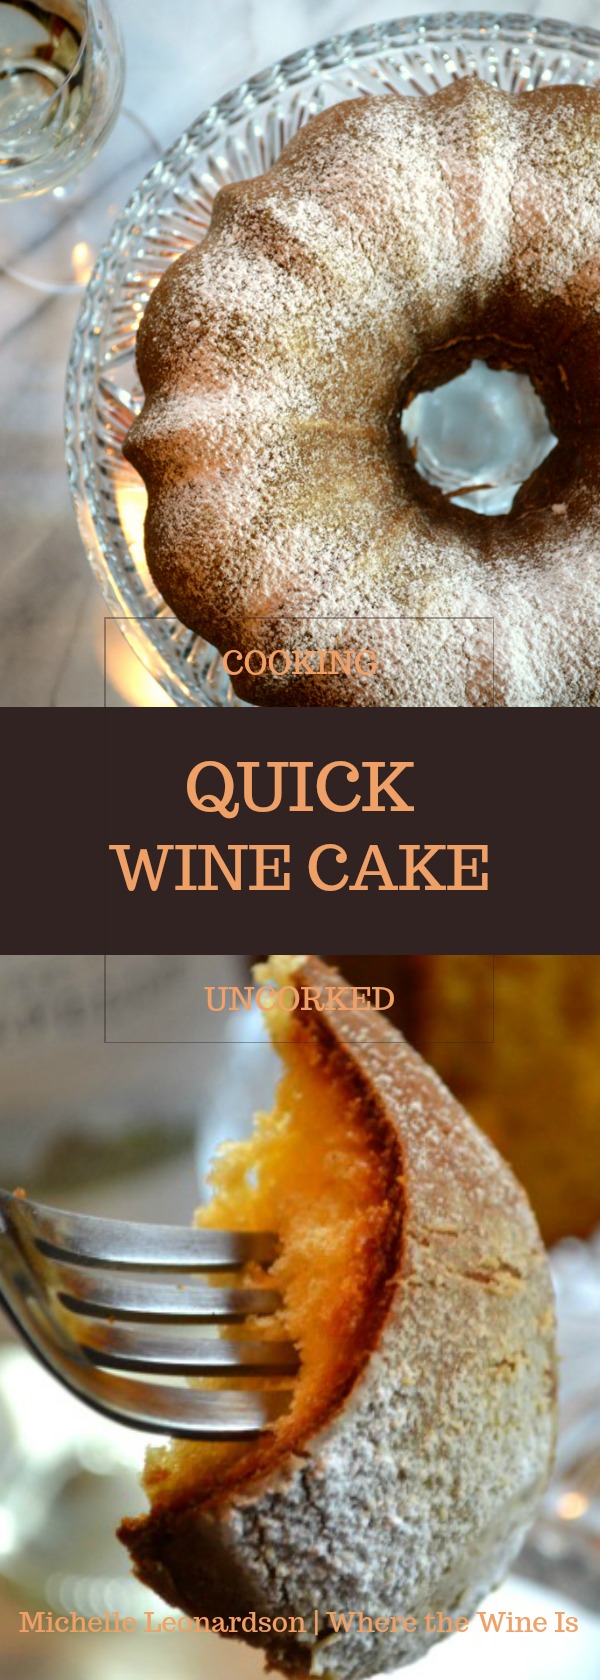 Quick Wine Cake Recipe! This Bundt practically makes itself by baking with white wine and a few other simple ingredients. It's SO easy and SO delicious!